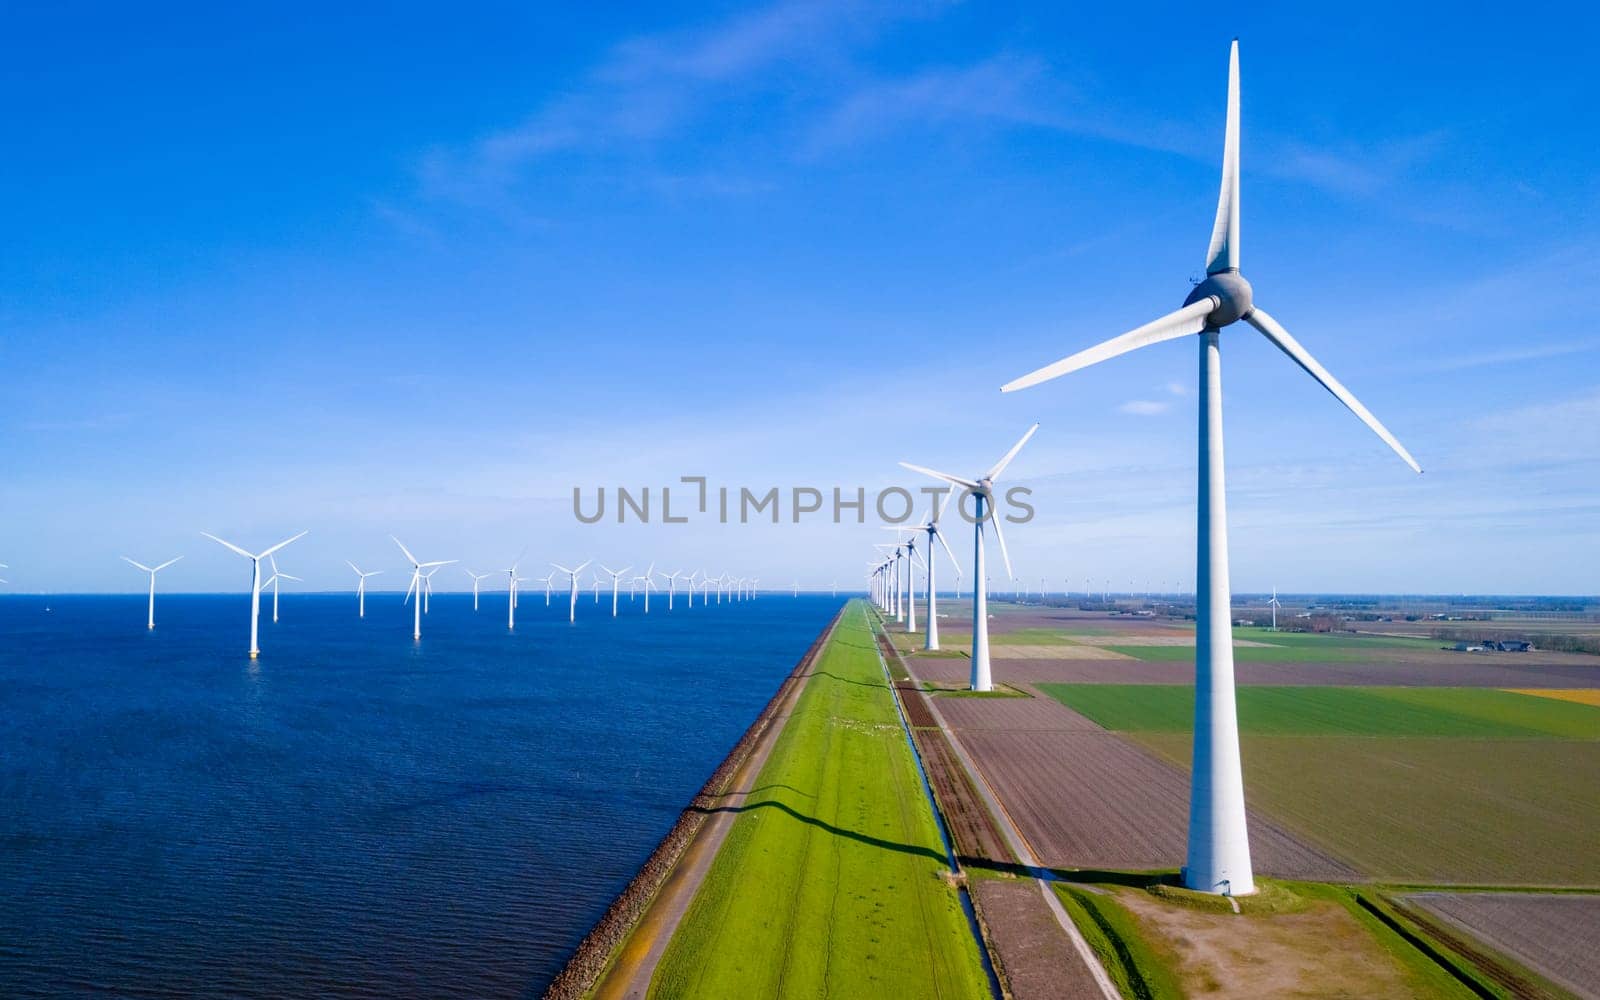 A serene landscape where a row of wind turbines stands tall next to a tranquil body of water in the Netherlands Flevoland during springtime by fokkebok